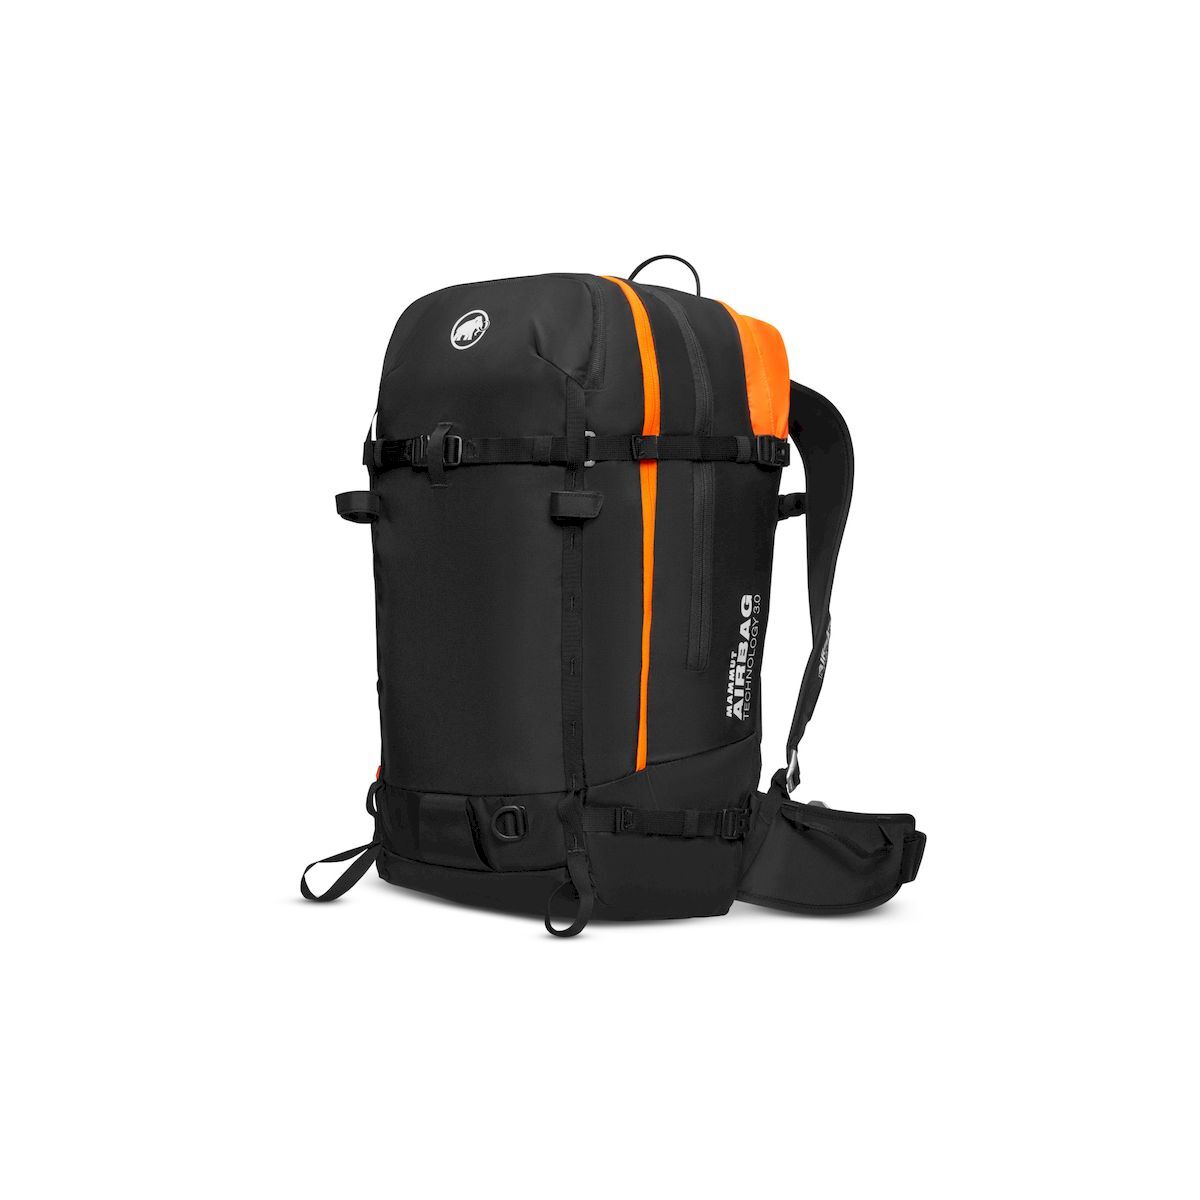 Mammut Pro 35 Removable Airbag 3.0 - Sac à dos airbag | Hardloop